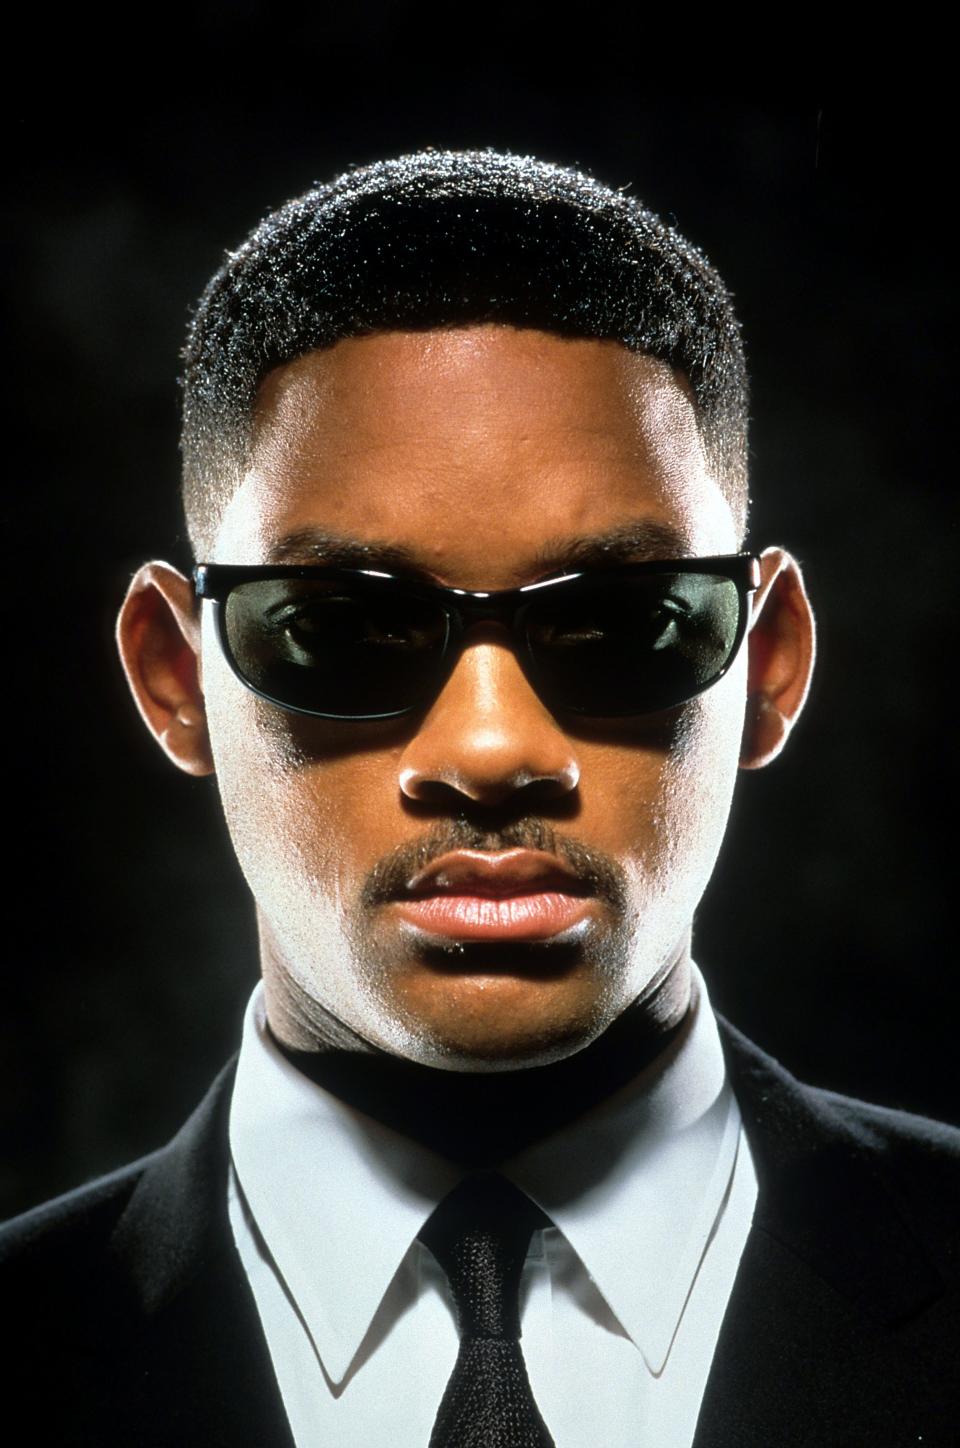 Will Smith in a black suit and black sun glasses